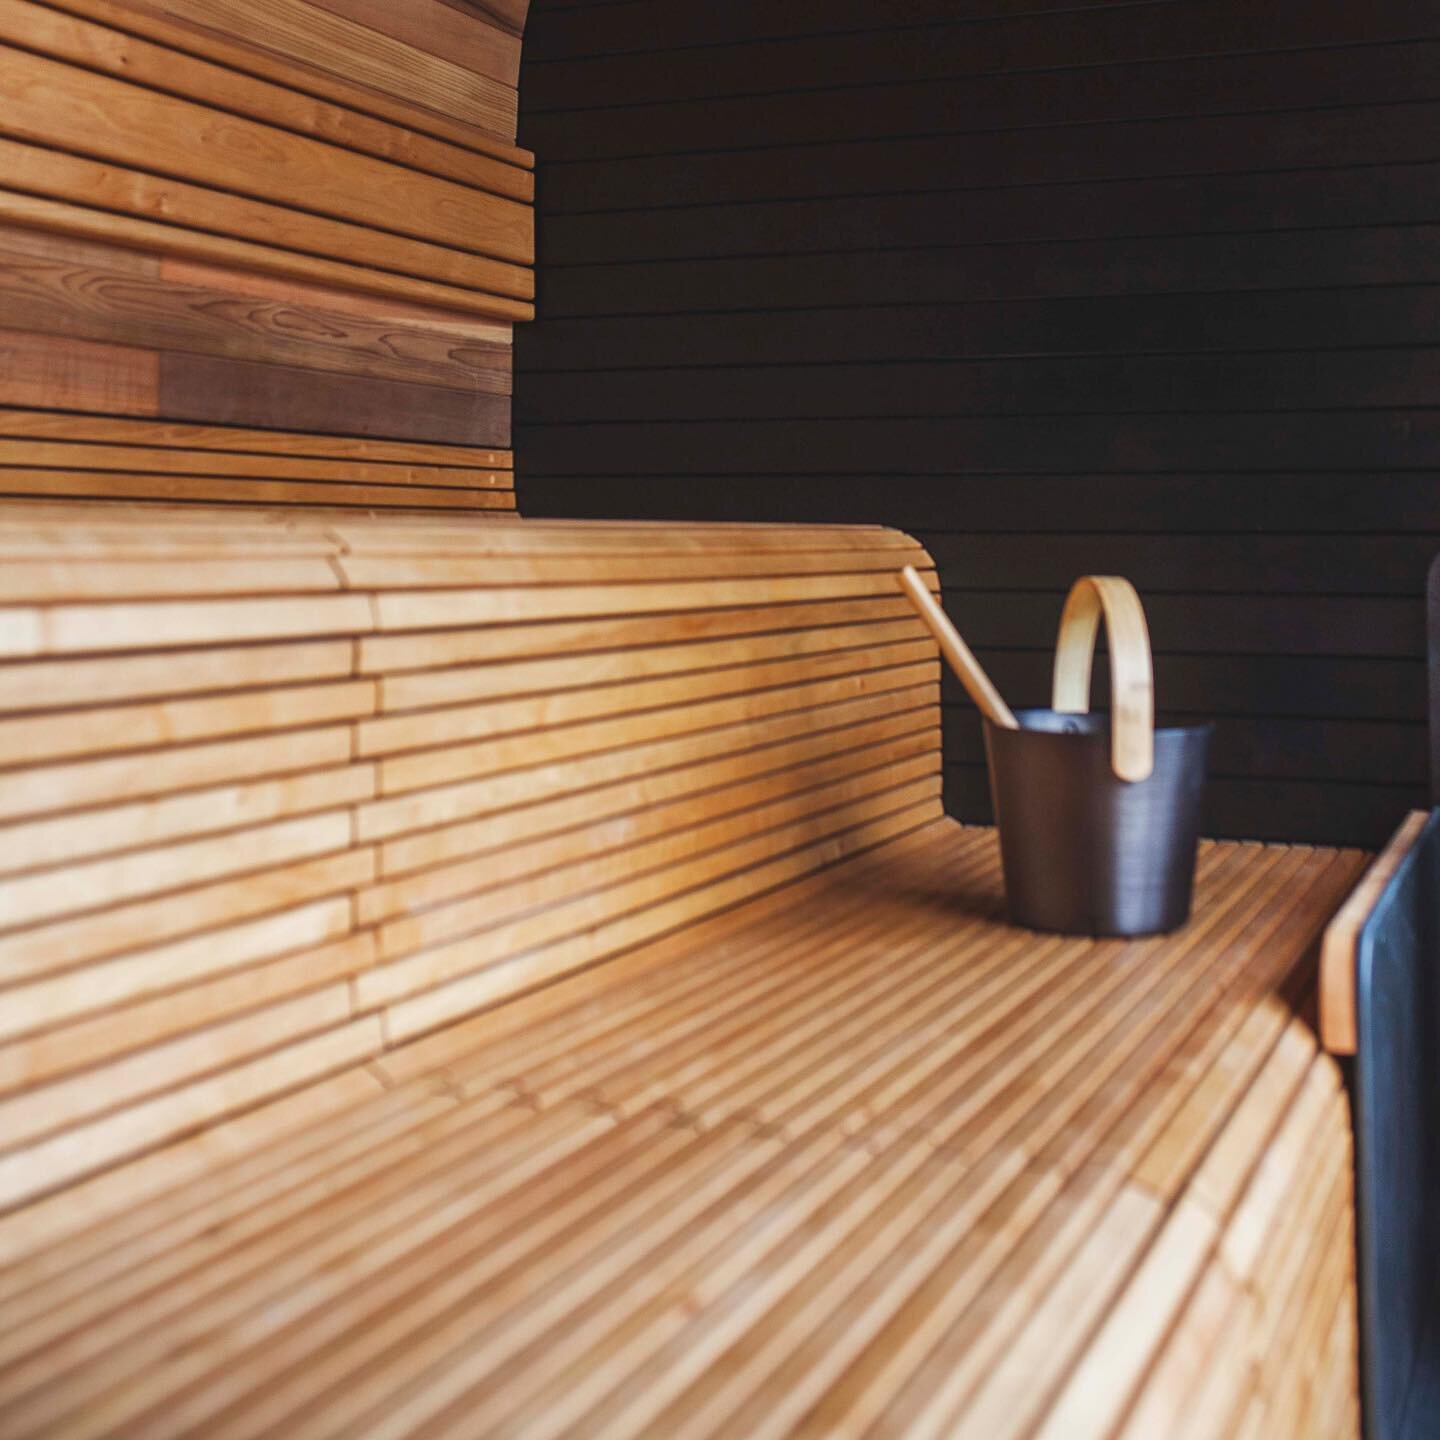 Our two tiered benches are made from a slow grown alder - a highly durable wood resistant to both water and heat! Handcrafted for you by the team @heartwoodsaunas 

#heartwoodsaunas #irelandshiddenheartlands #sauna #saunadesign